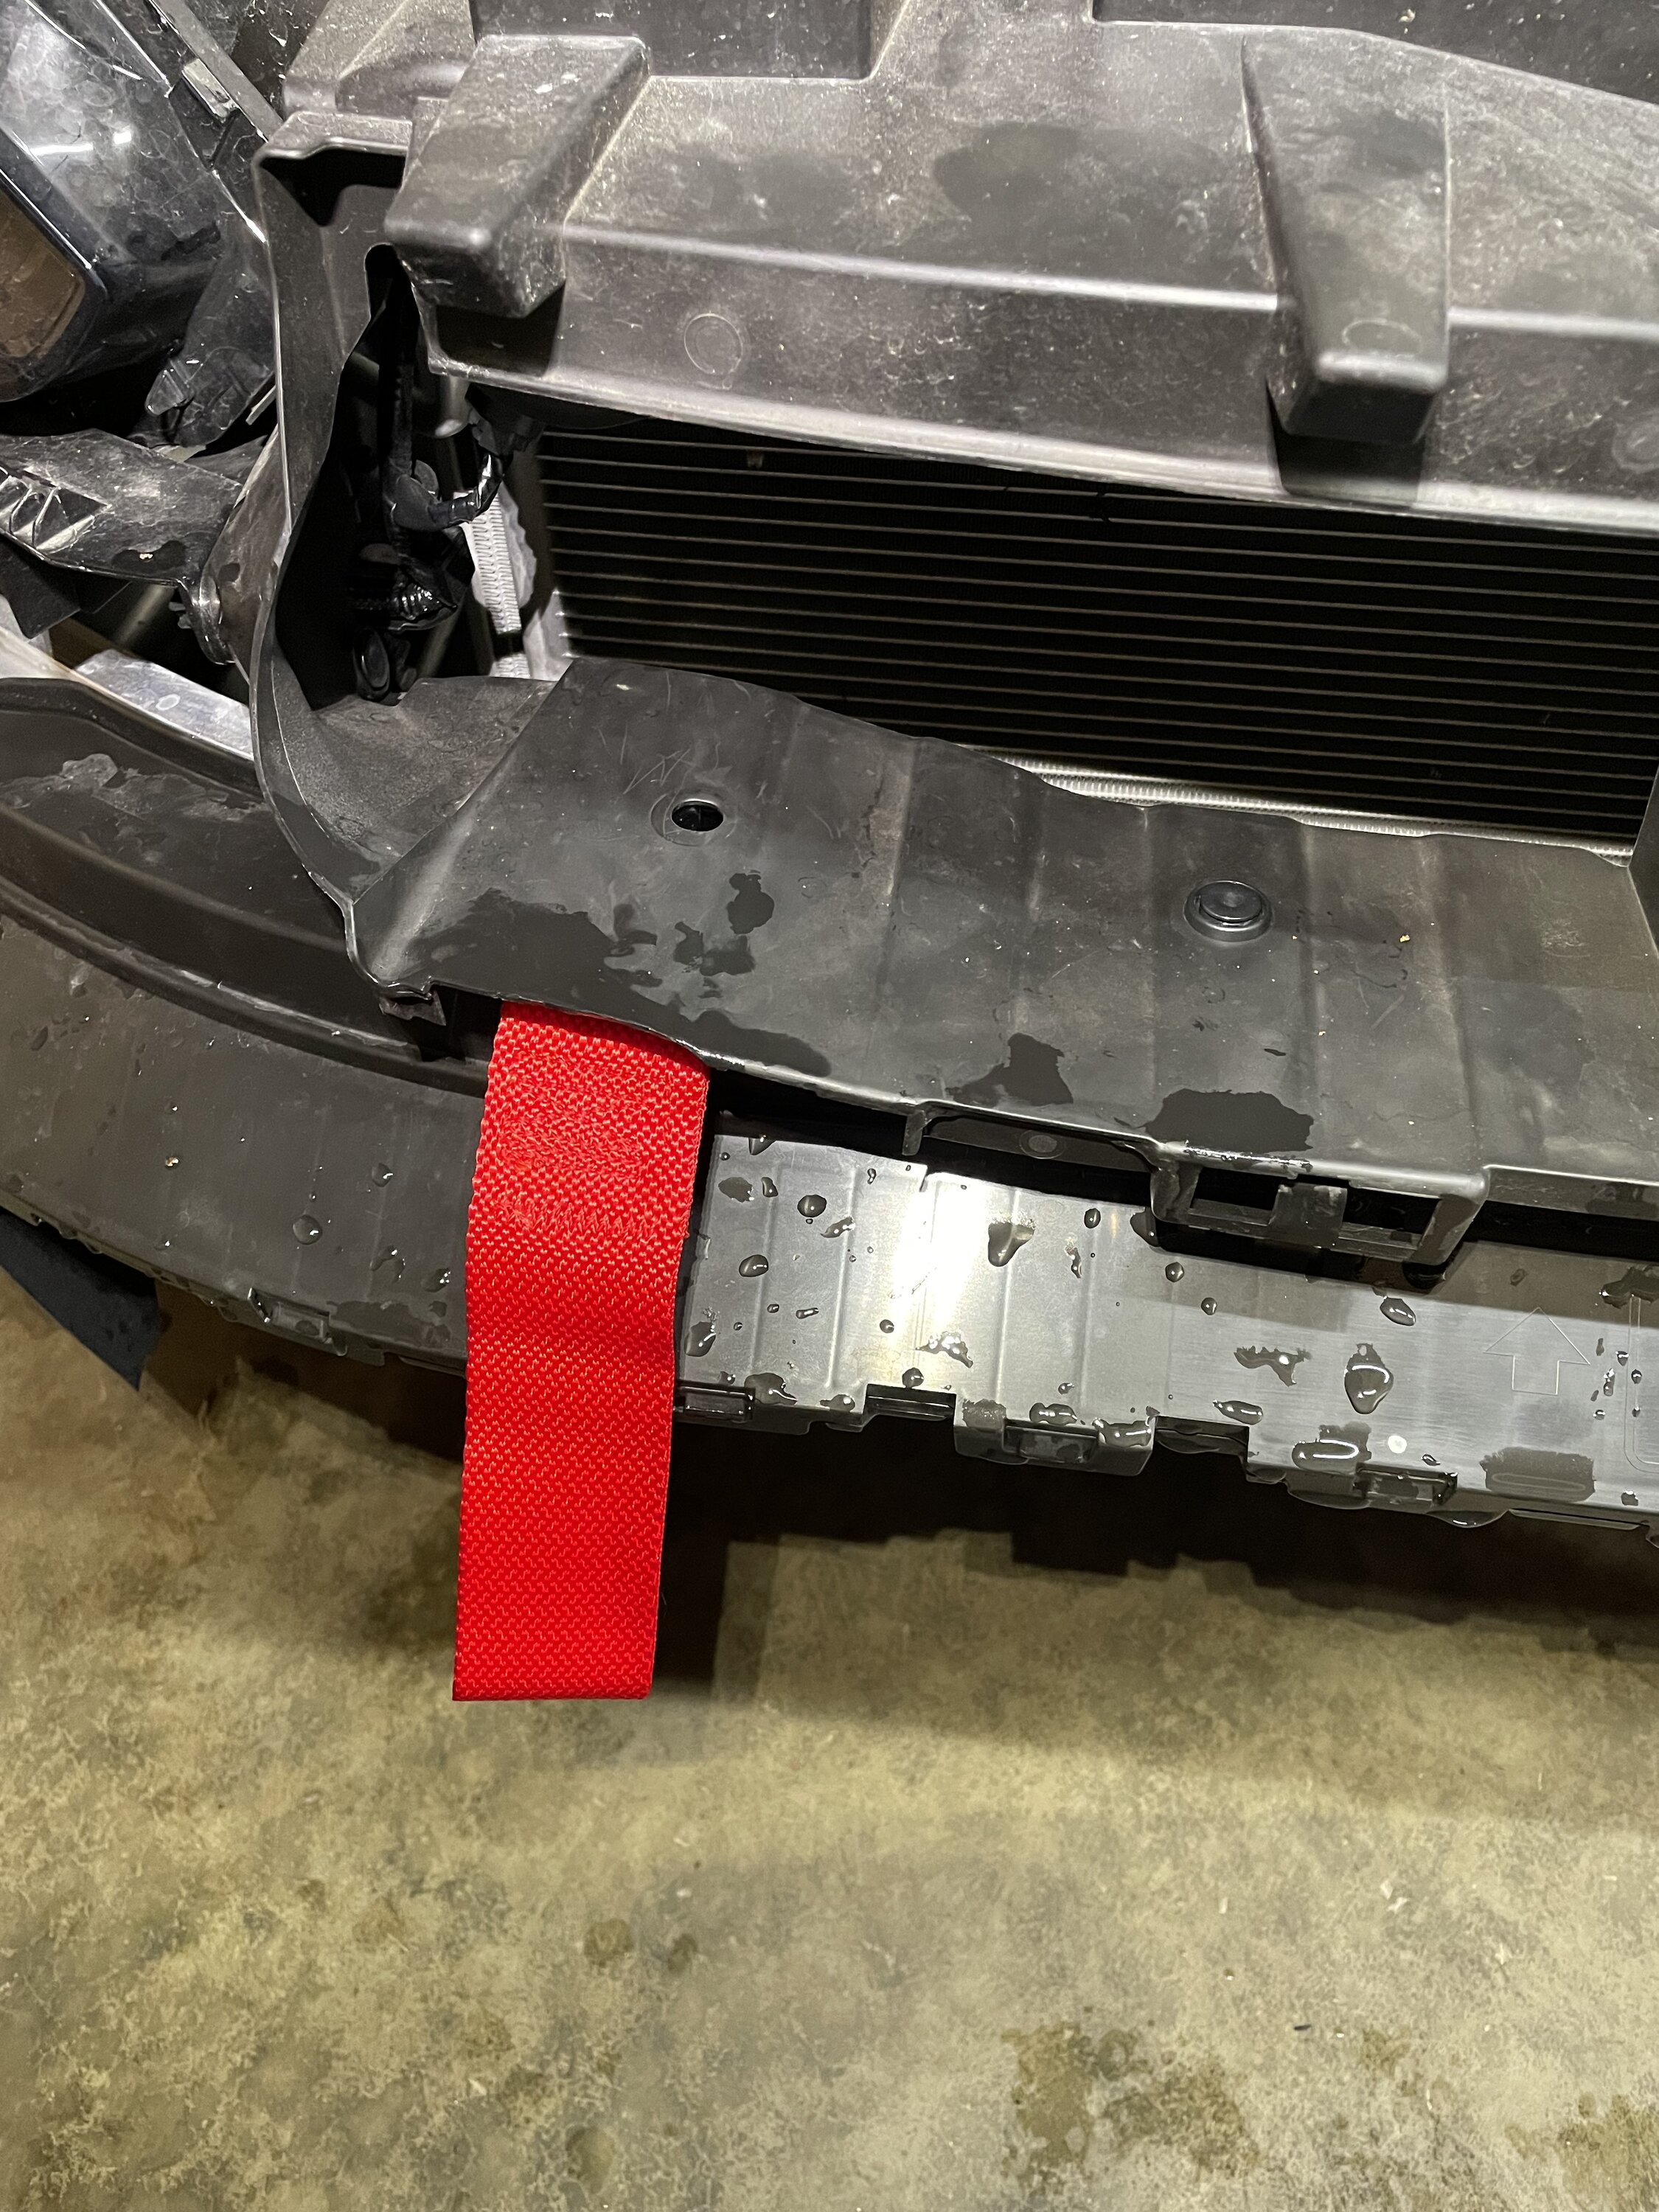 Tow Strap Setup for the Track  CivicXI - 11th Gen Civic Type R (FL5),  Hybrid, Si Forum, News, Owners, Discussions